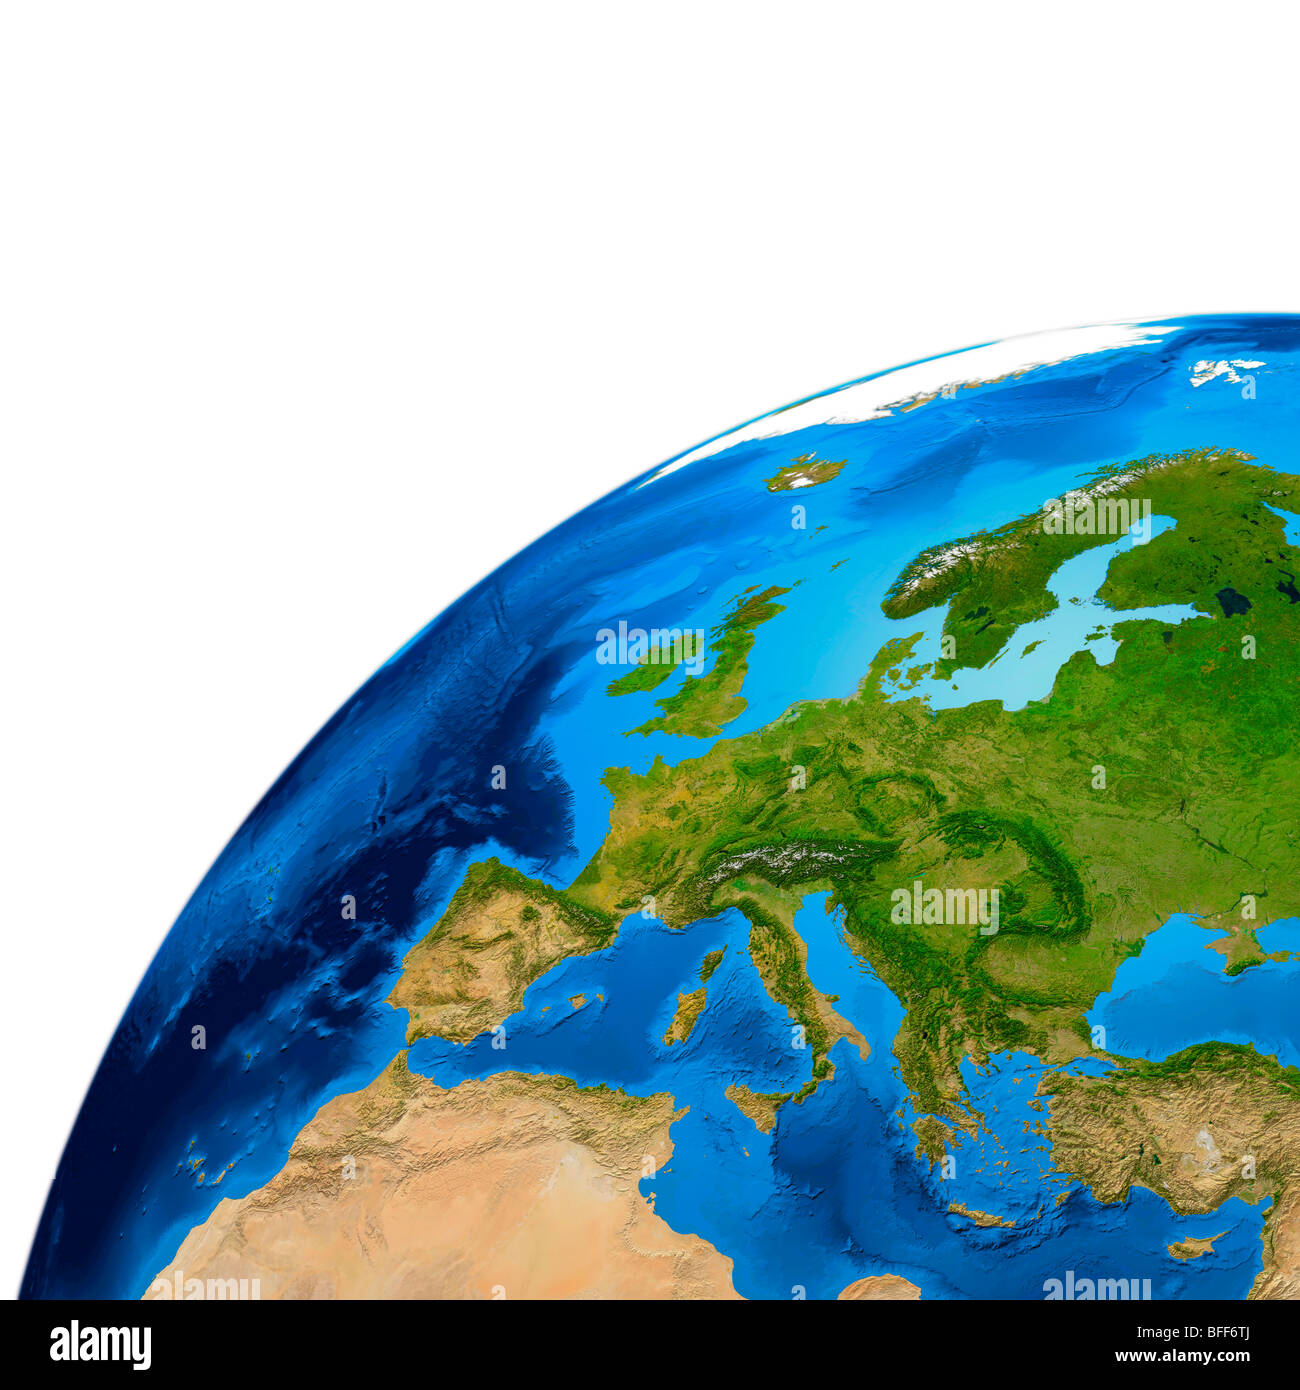 View of the Earth globe from space showing European continent Stock Photo